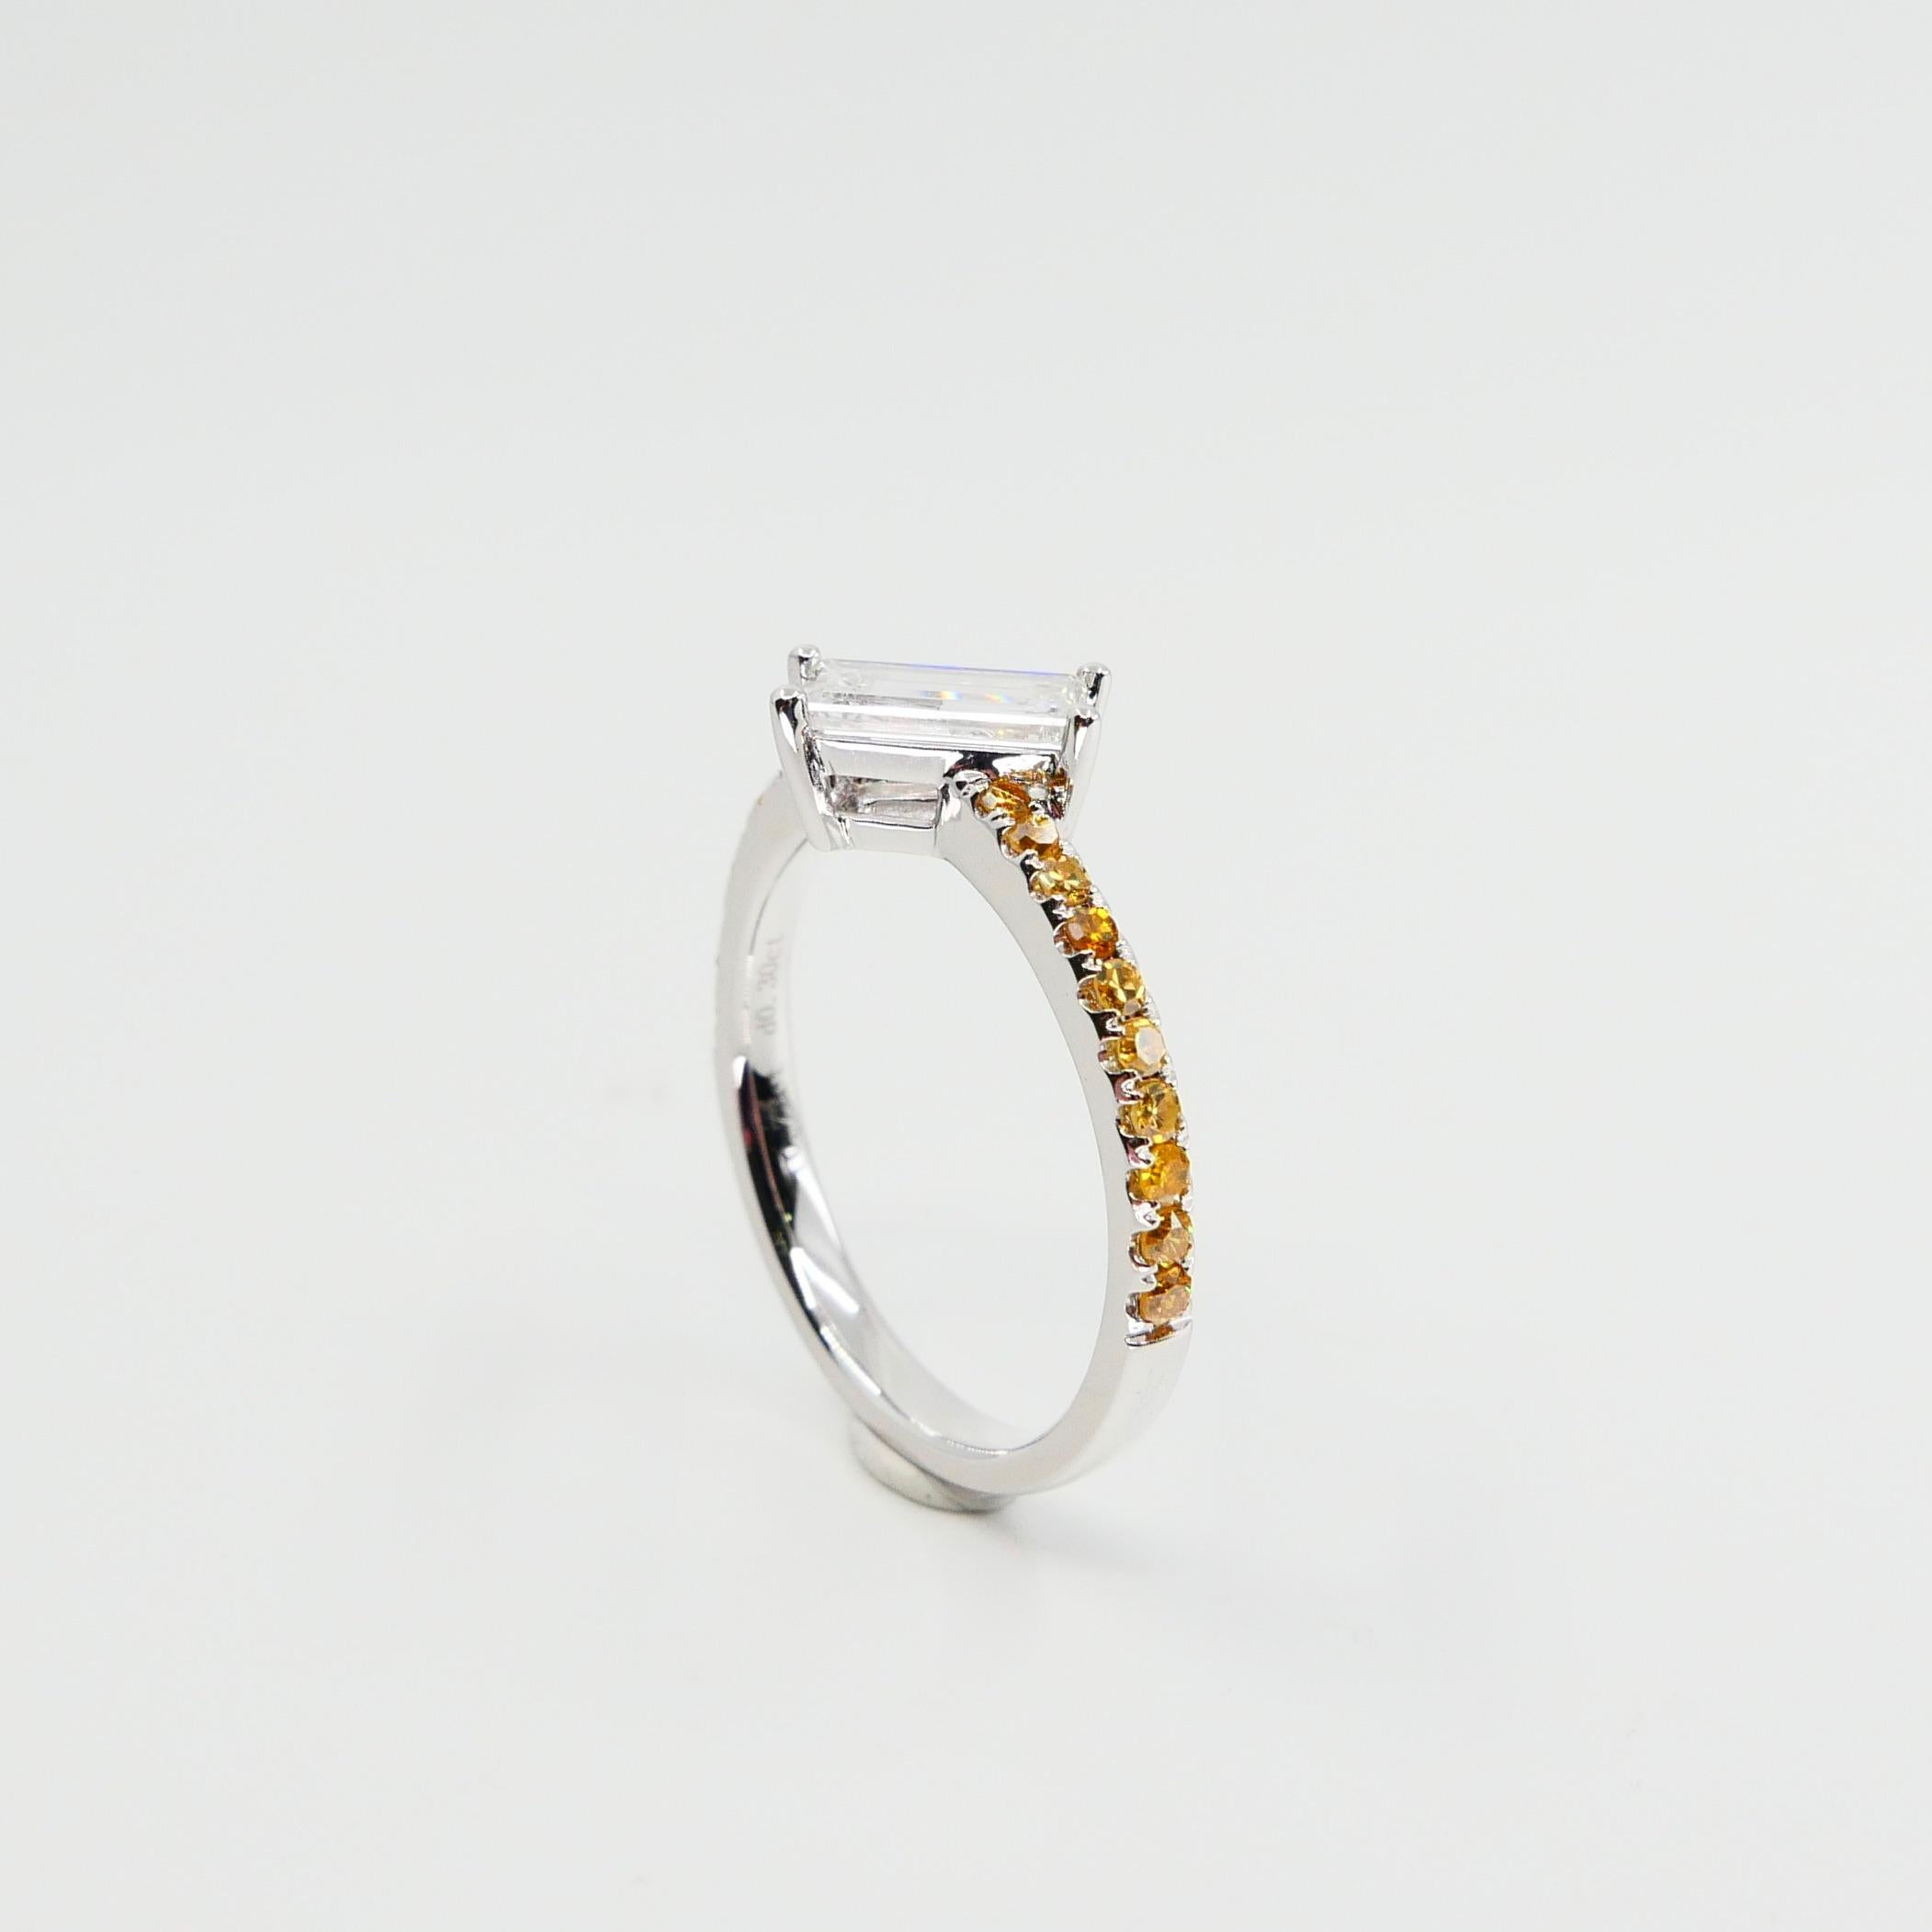 Extra Long Baguette '0.73 Carat' with Fancy Vivid Yellow Diamond Cocktail Ring 10